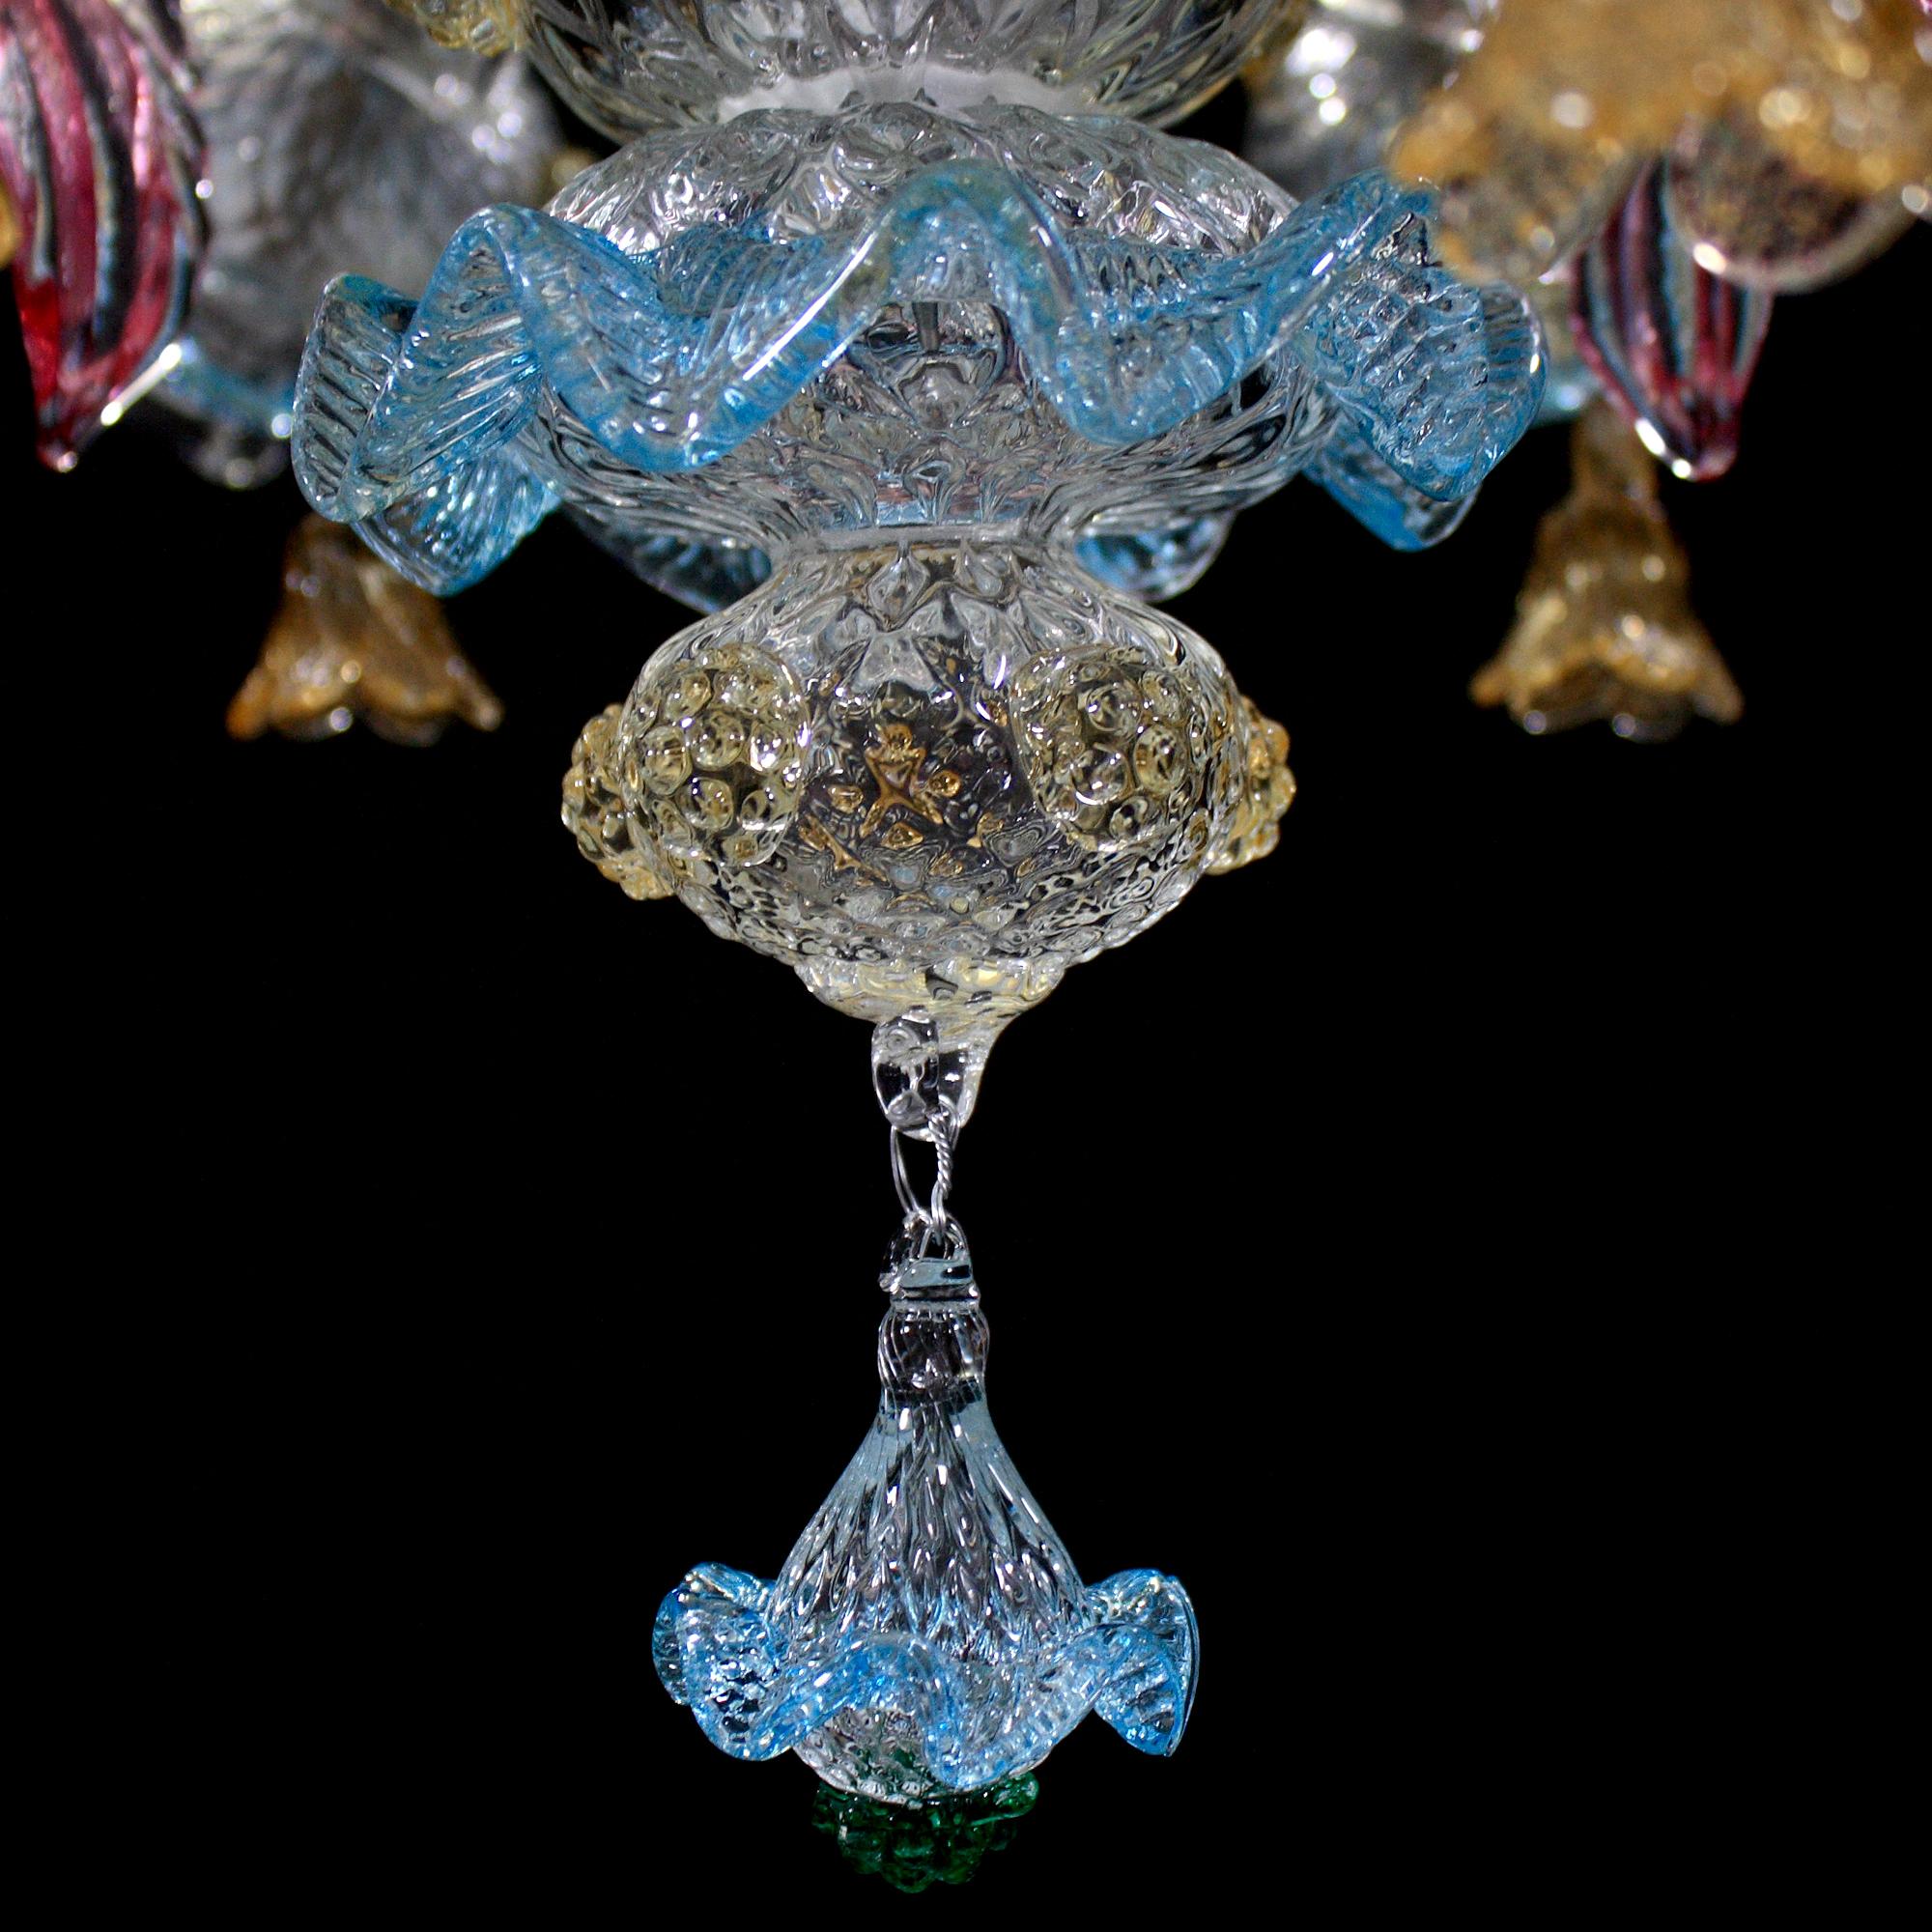 Custom Chandelier 5 Arms Crystal and Gold, Multicolored Details by Multiforme 4